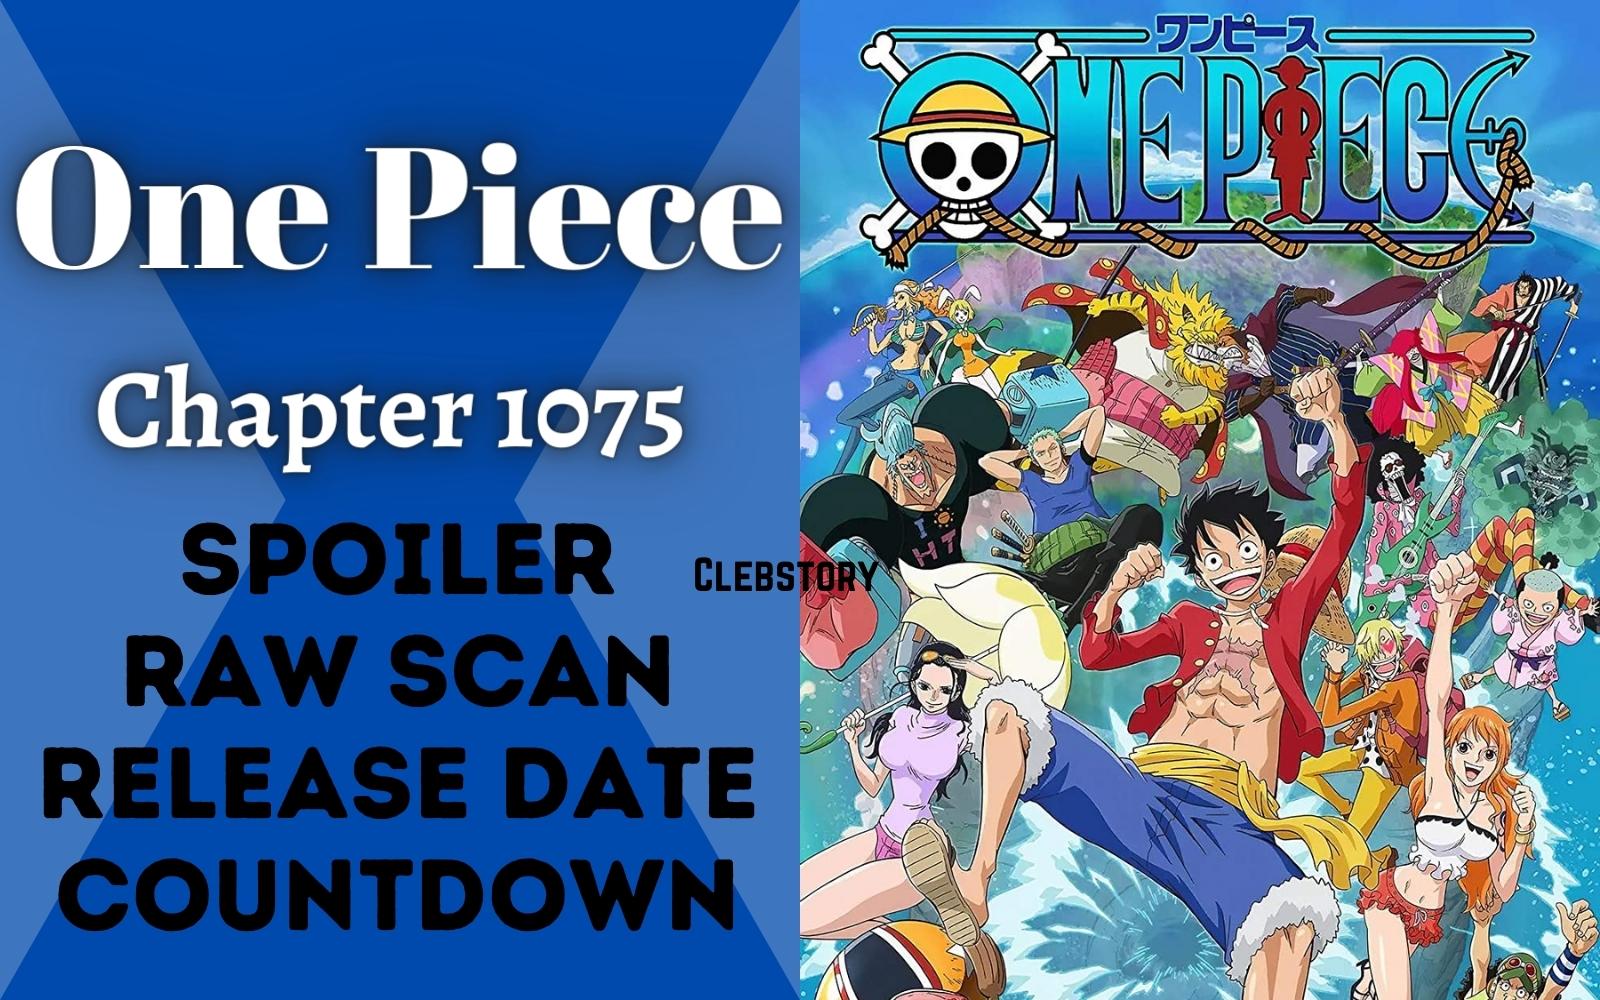 One Piece' 1022 Raw Scans, Spoilers, Release Date, Predictions And